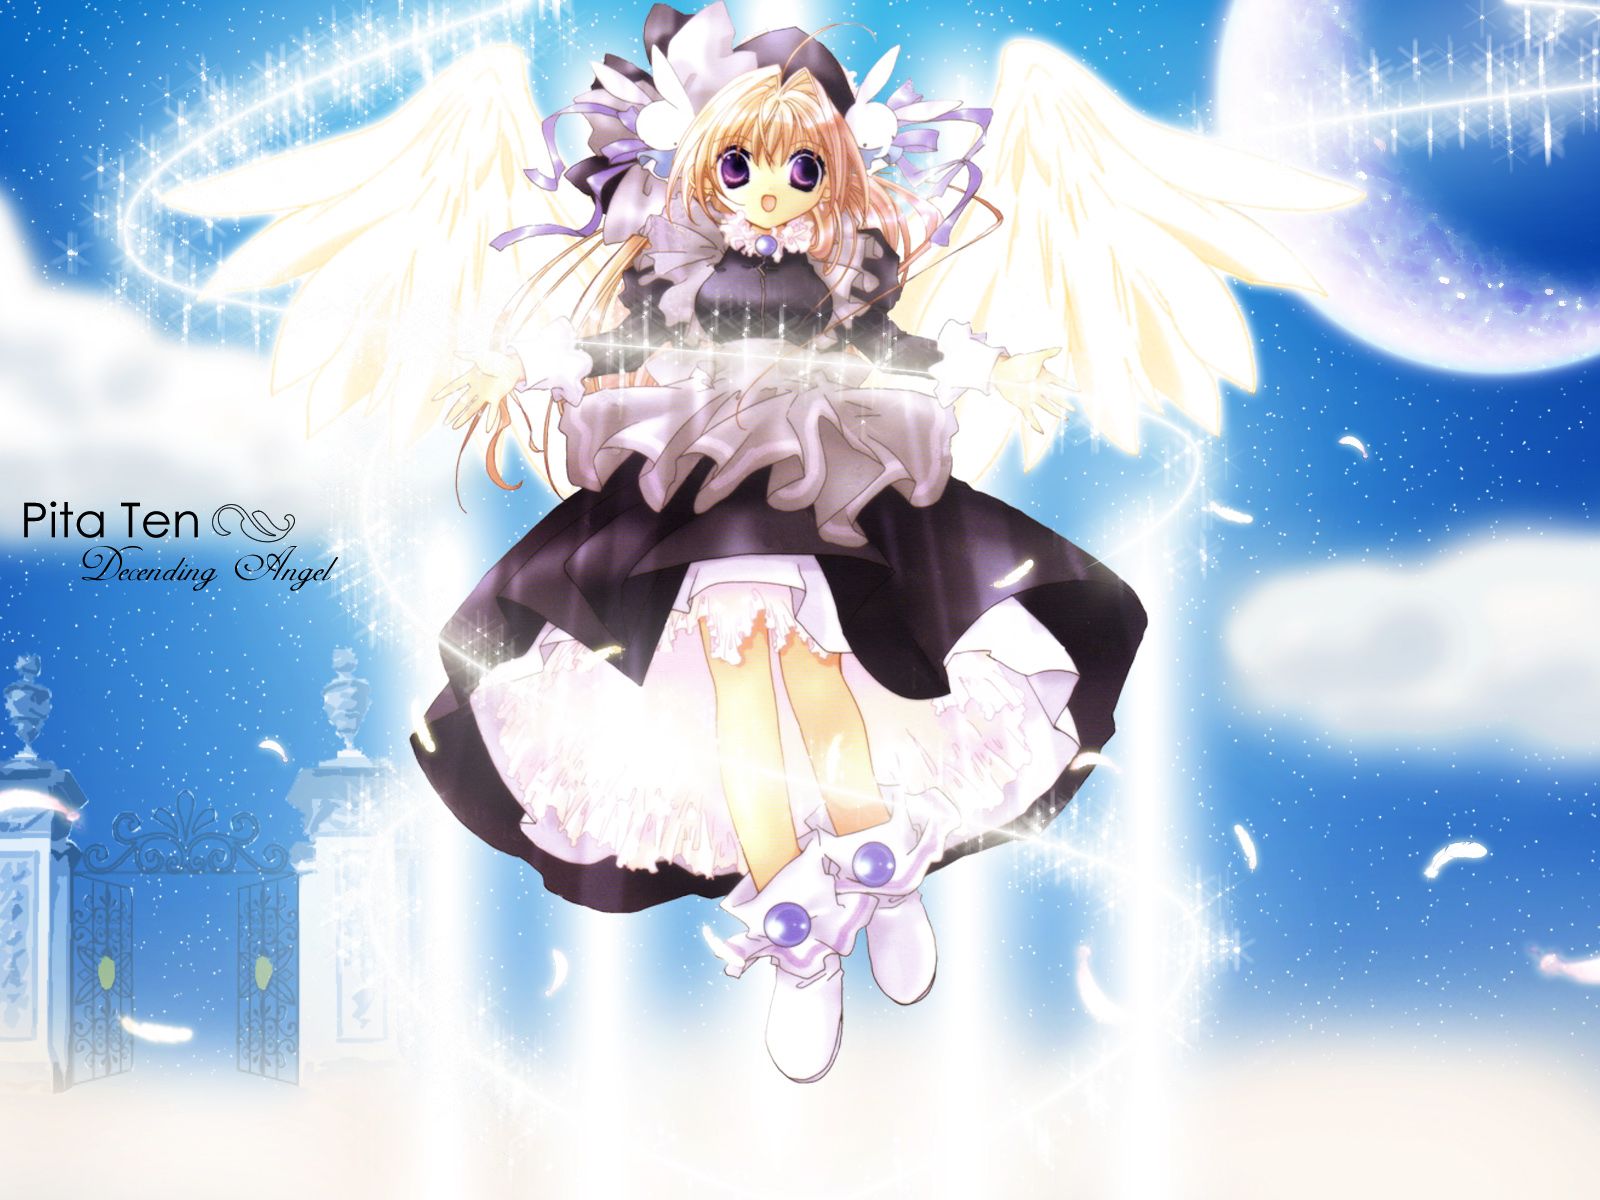 Anime Wallpaper Free Pita Ten Angel Wallpaper, Photo, Picture and Background. Anime wallpaper download, Anime, Anime wallpaper